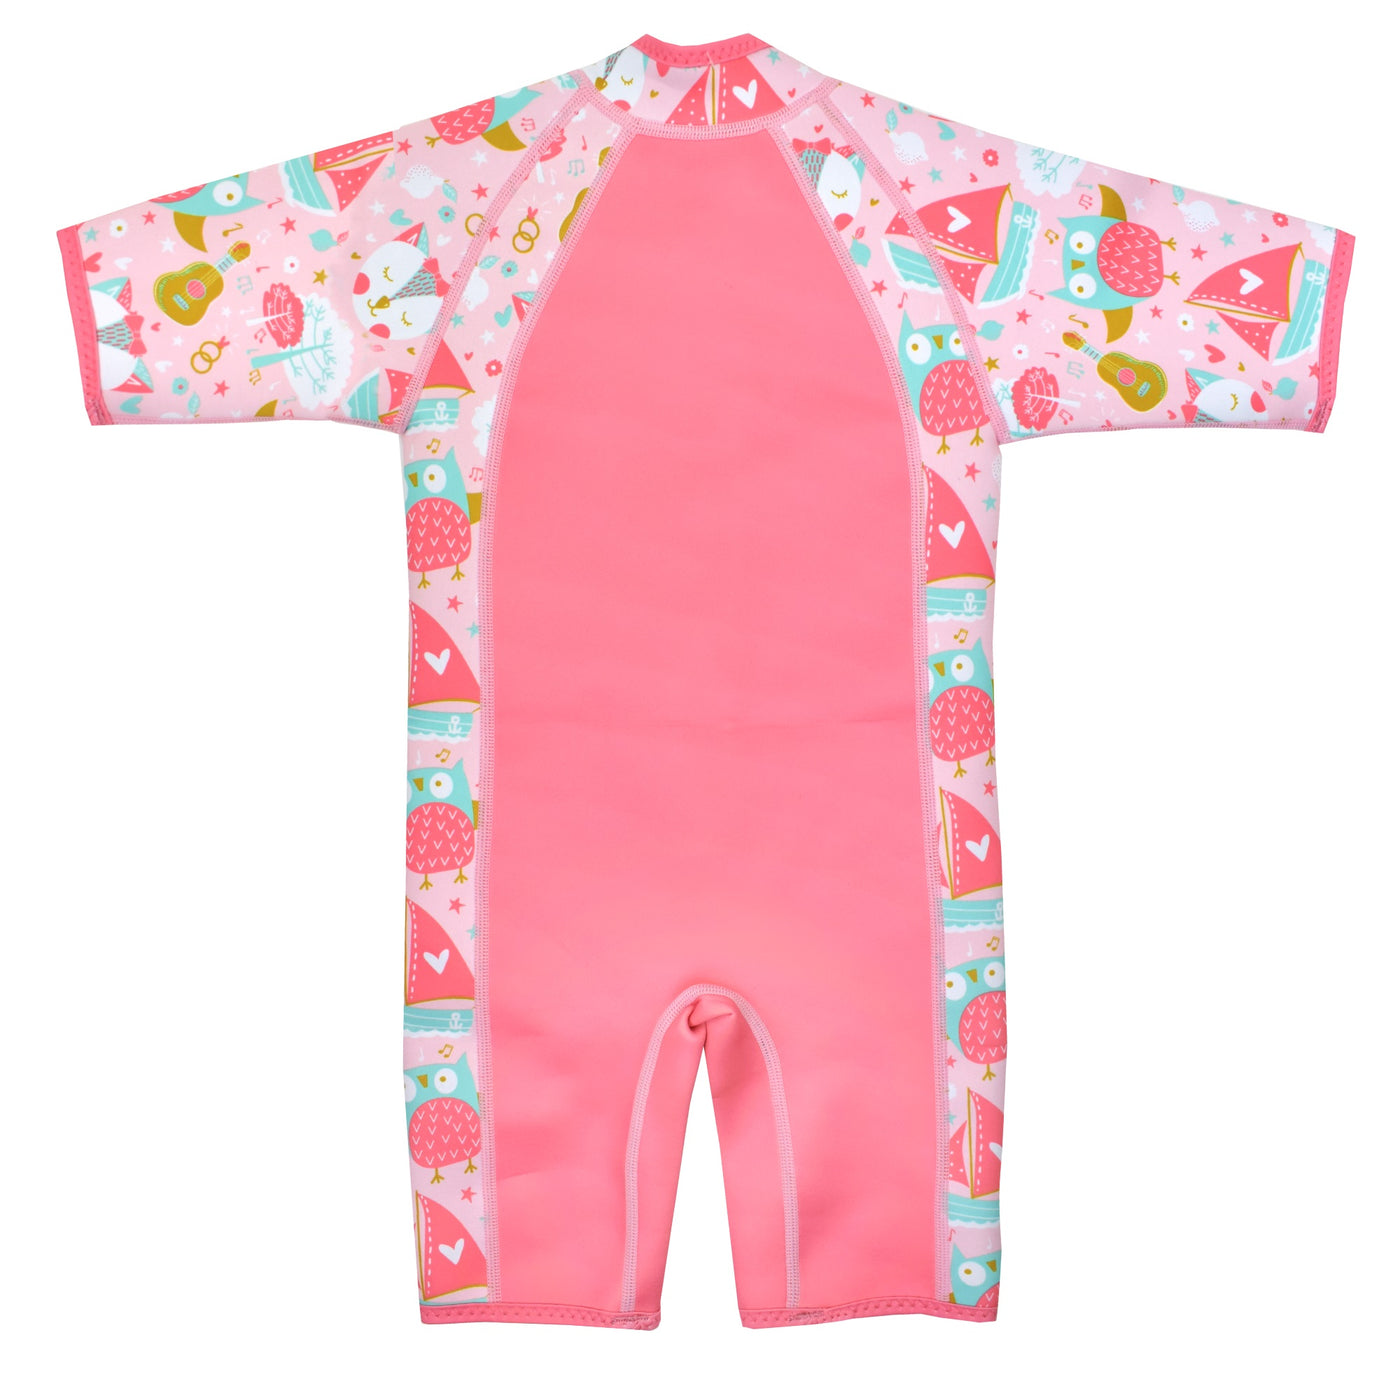 Kids shorty wetsuit in pink Owl and Pussycat print